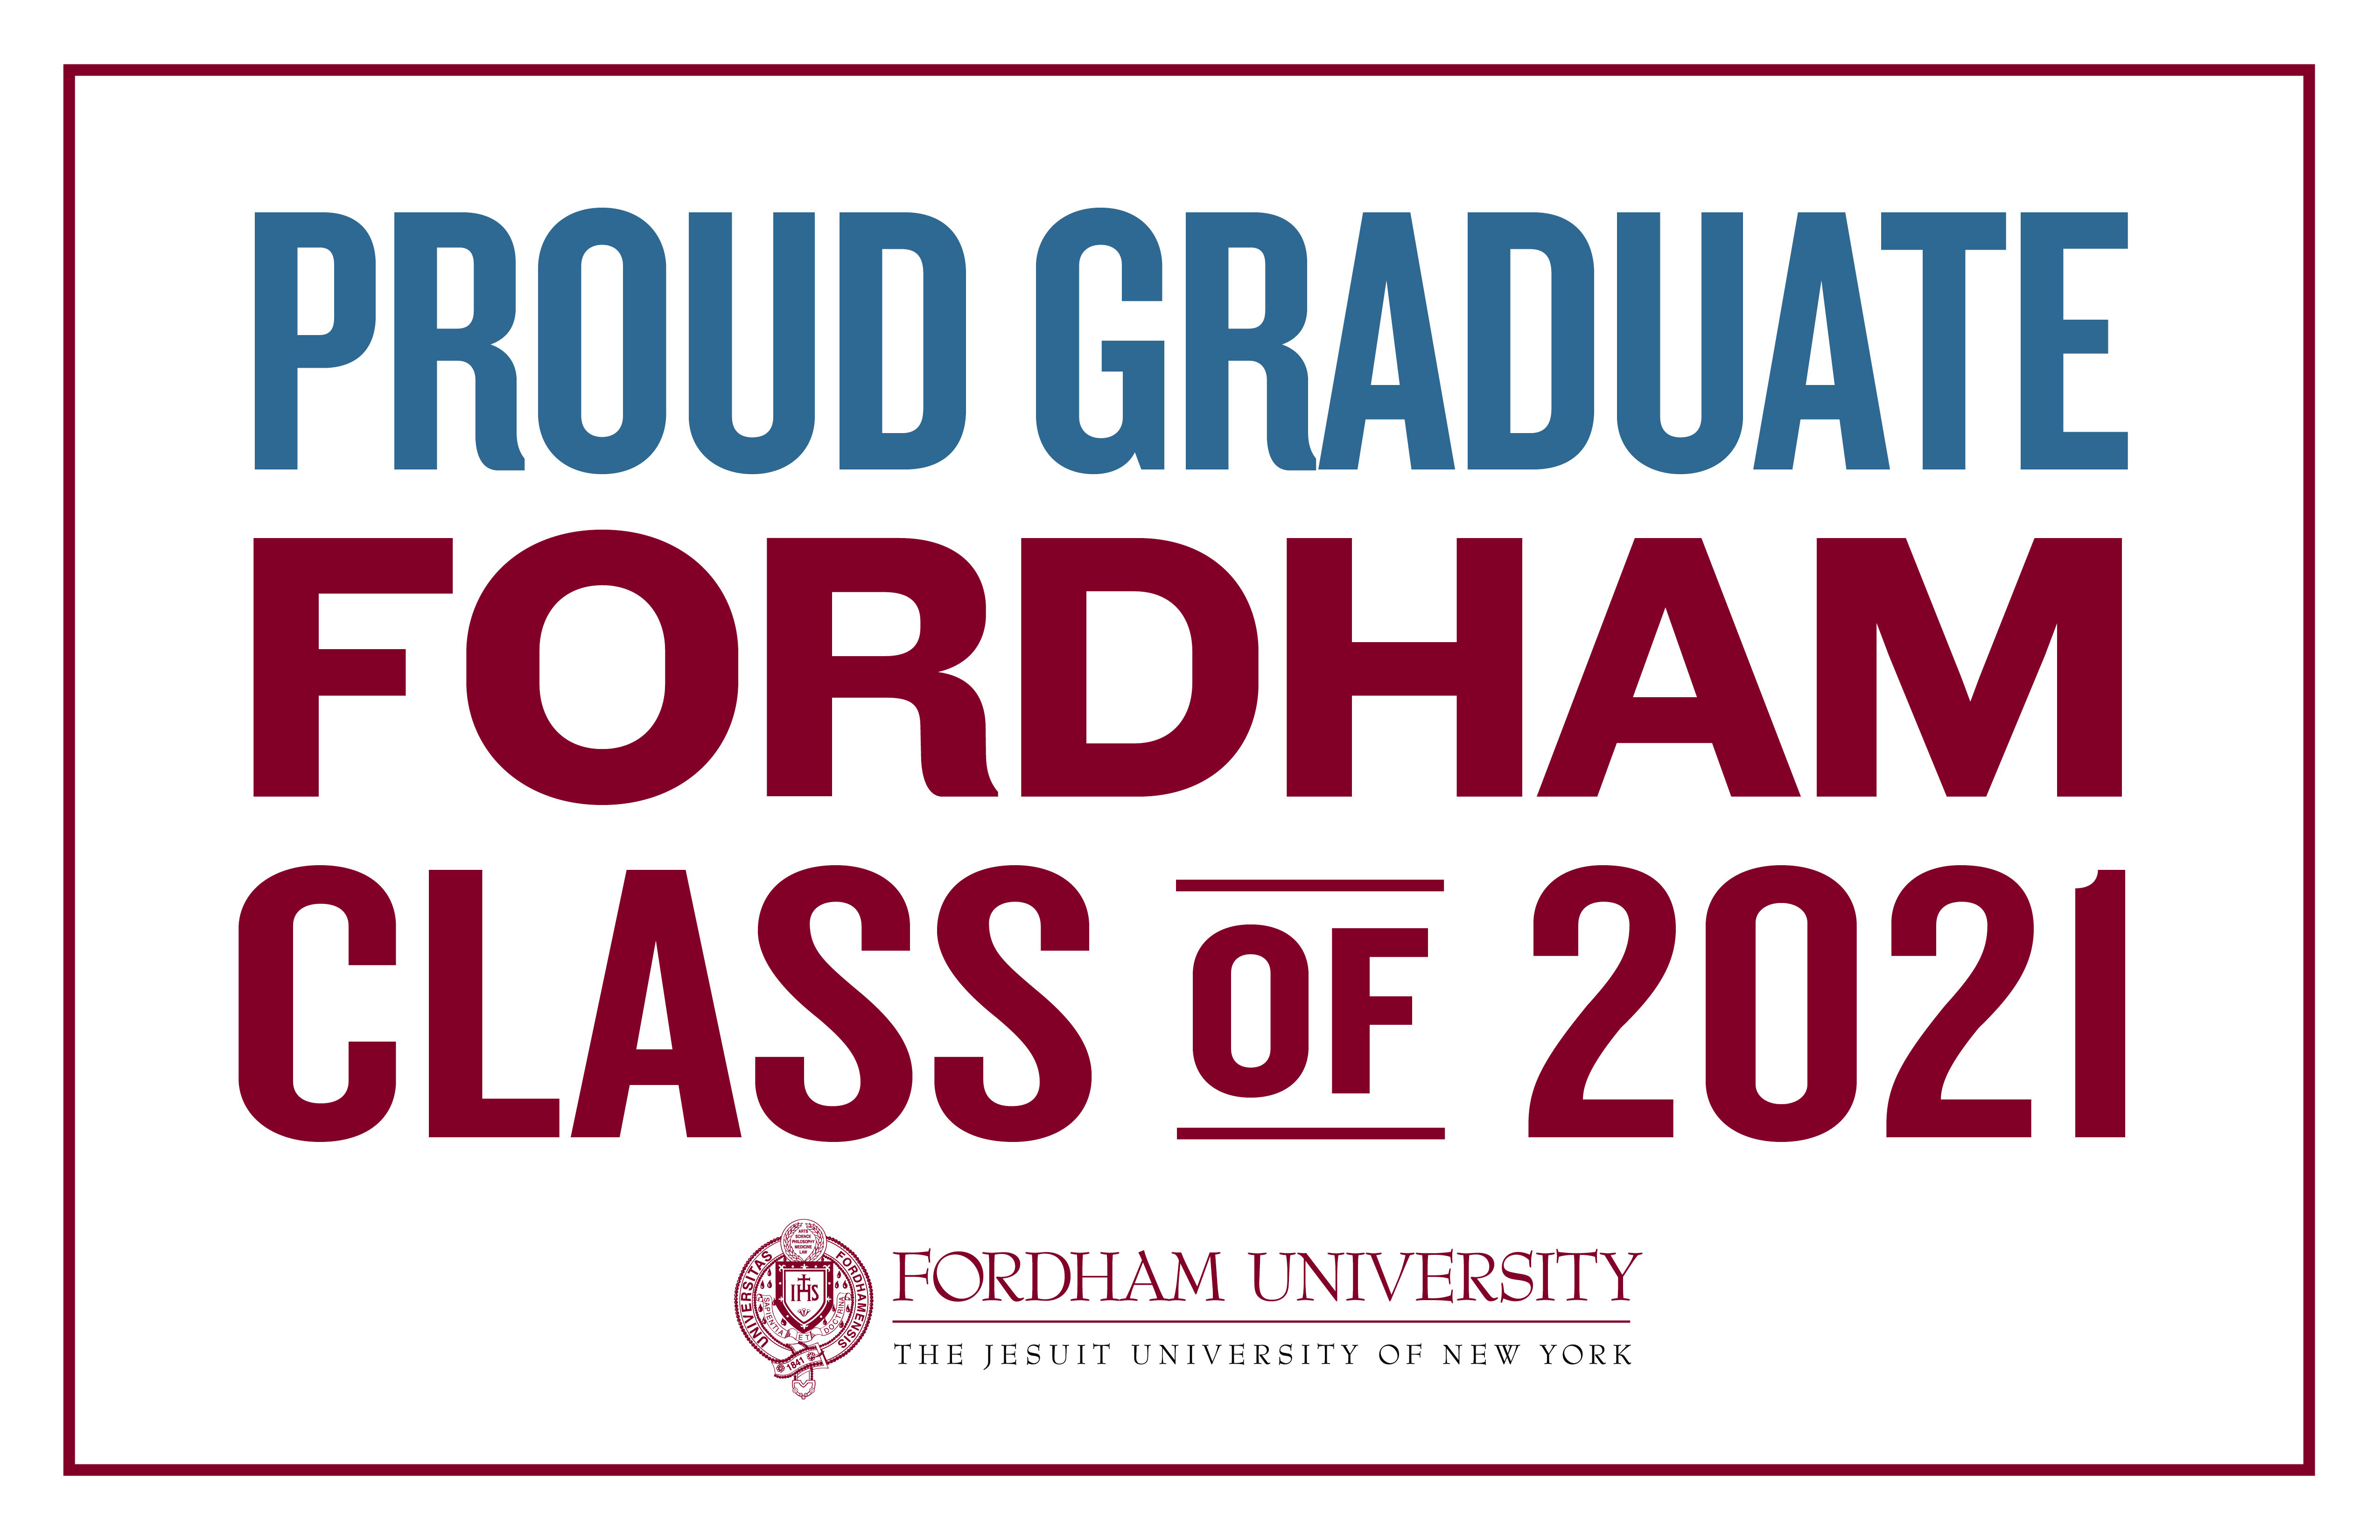 Fordham Commencement Lawn Sign with Proud Graduate in Blue and Fordham Class of 2021 in Red.